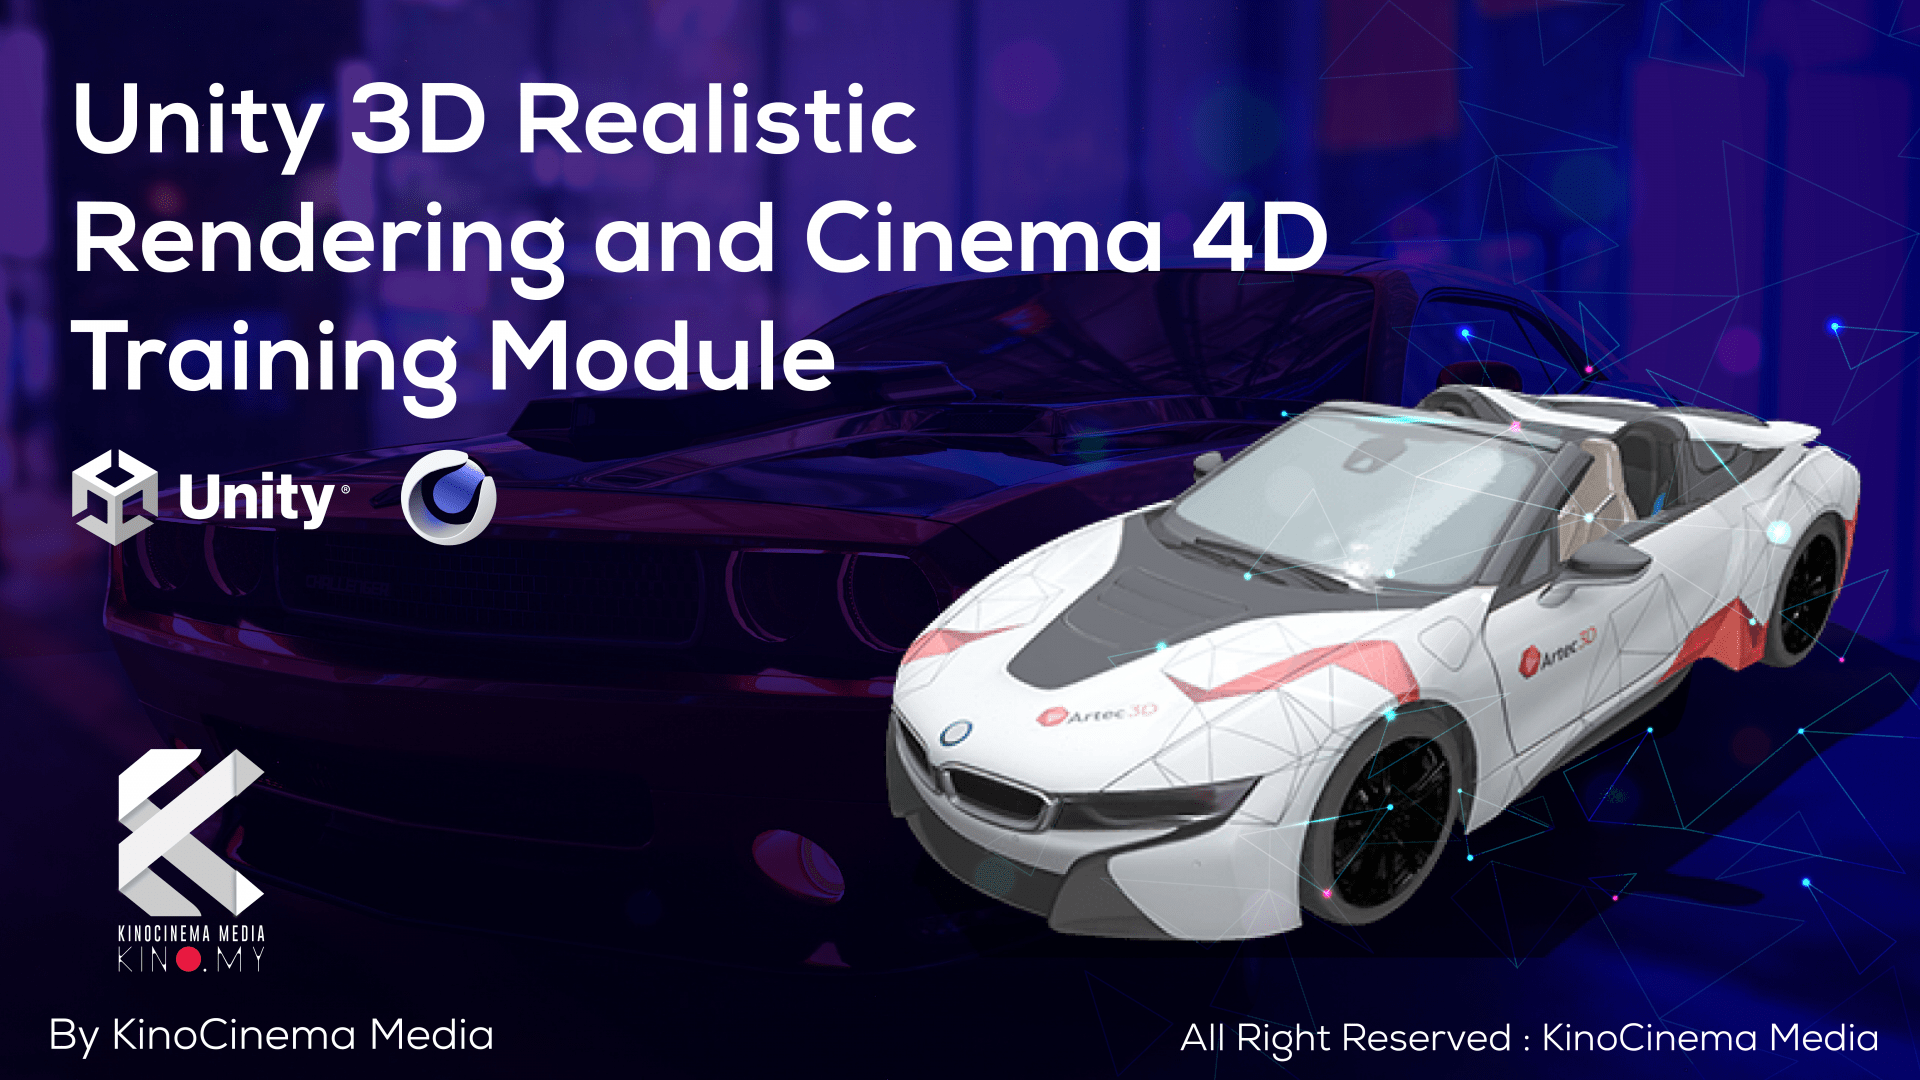 Unity 3D Realistic Rendering and Cinema 4D Training 